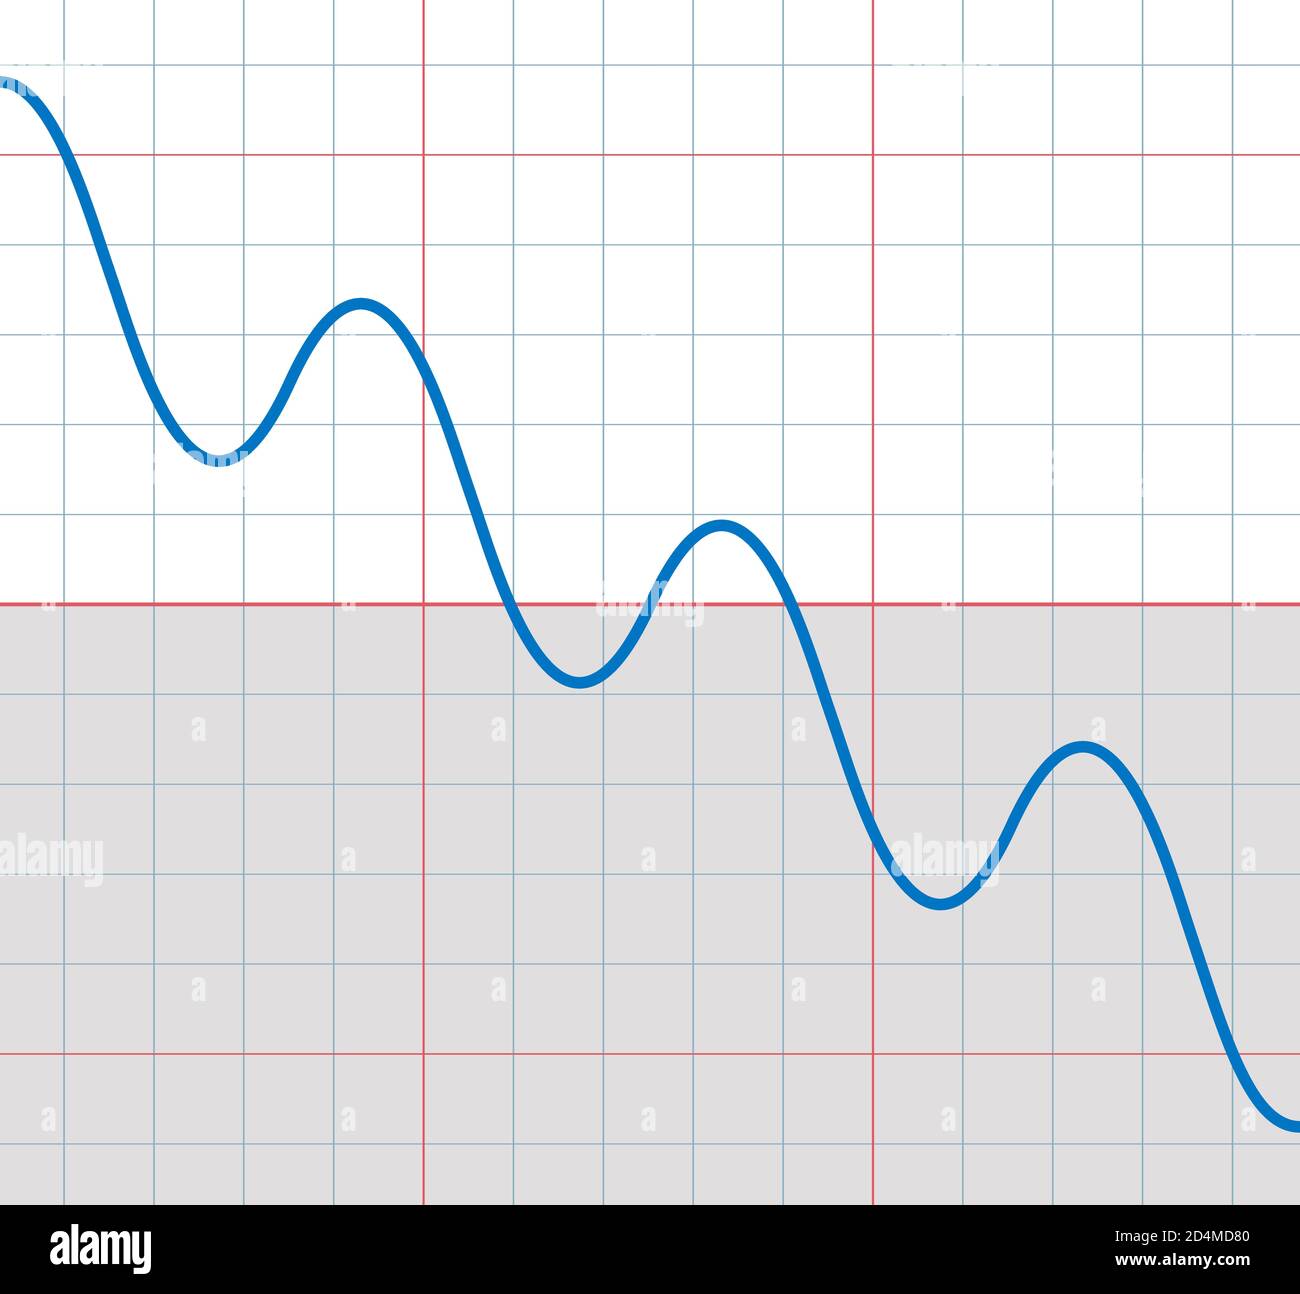 Falling sine curve with some small sinusoids falling and rising - symbolic for downward trend with temporary deceptively increasing phases. Stock Photo